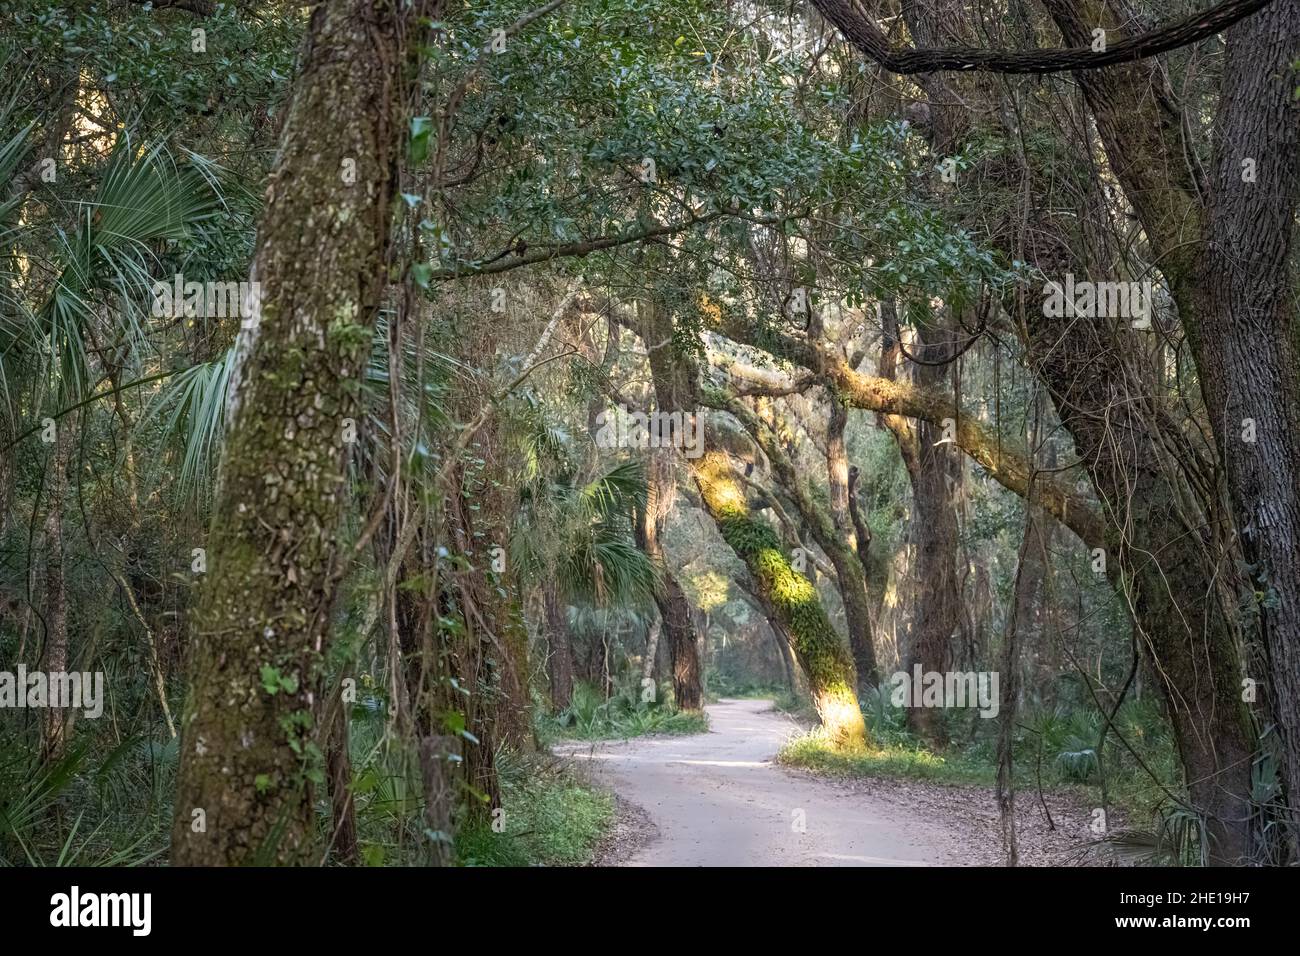 Sunrise light filters through the tree canopy on Fort George Island's winding dirt road to Kingsley Plantation in Jacksonville, Florida. (USA) Stock Photo